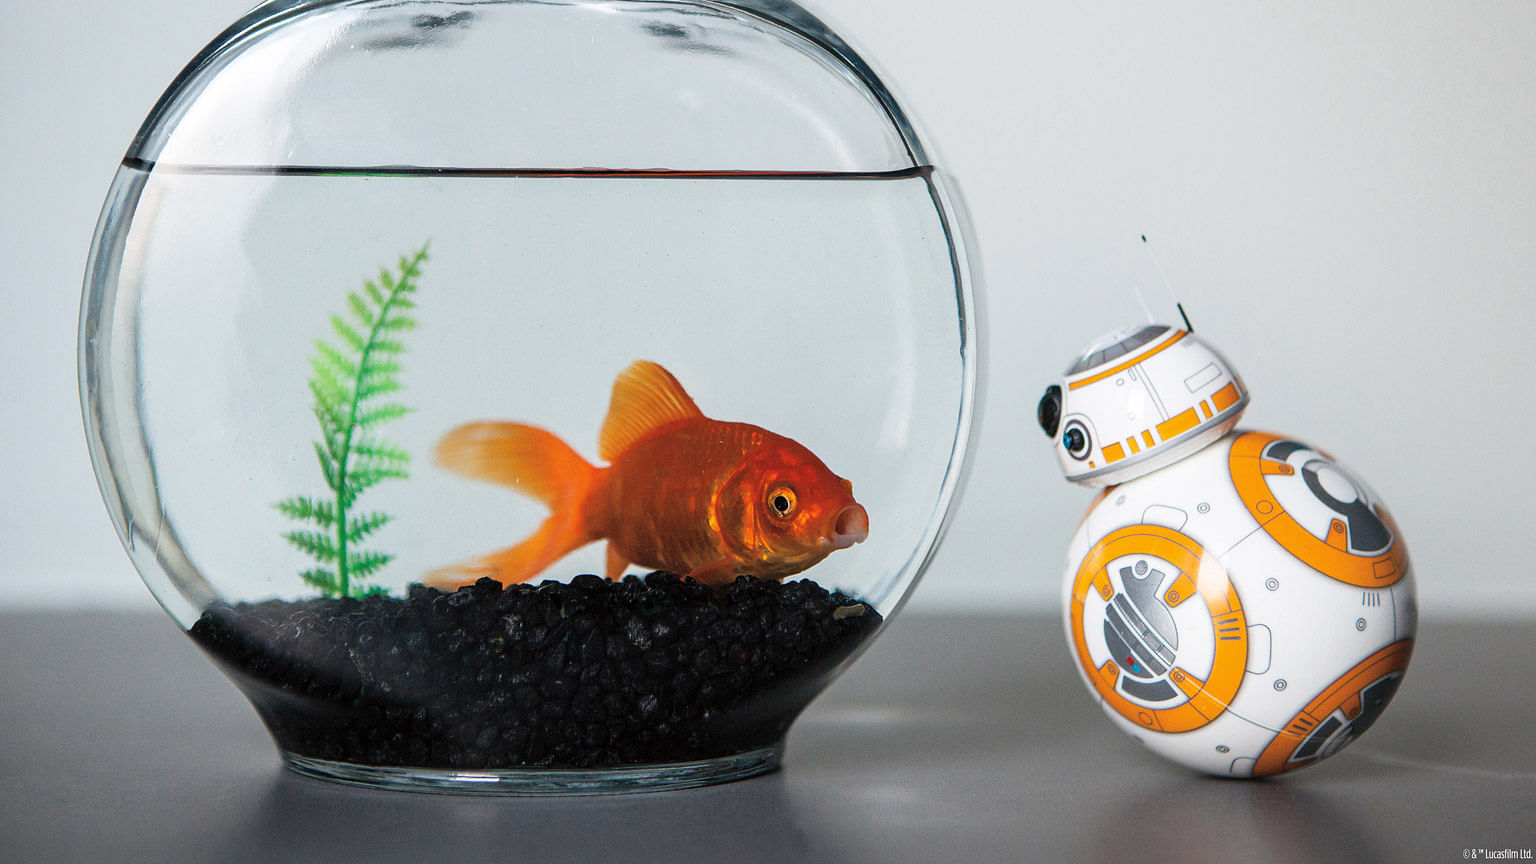 BB-8 looks at a goldfish in a bowl. (Photo Courtesy: Disney)